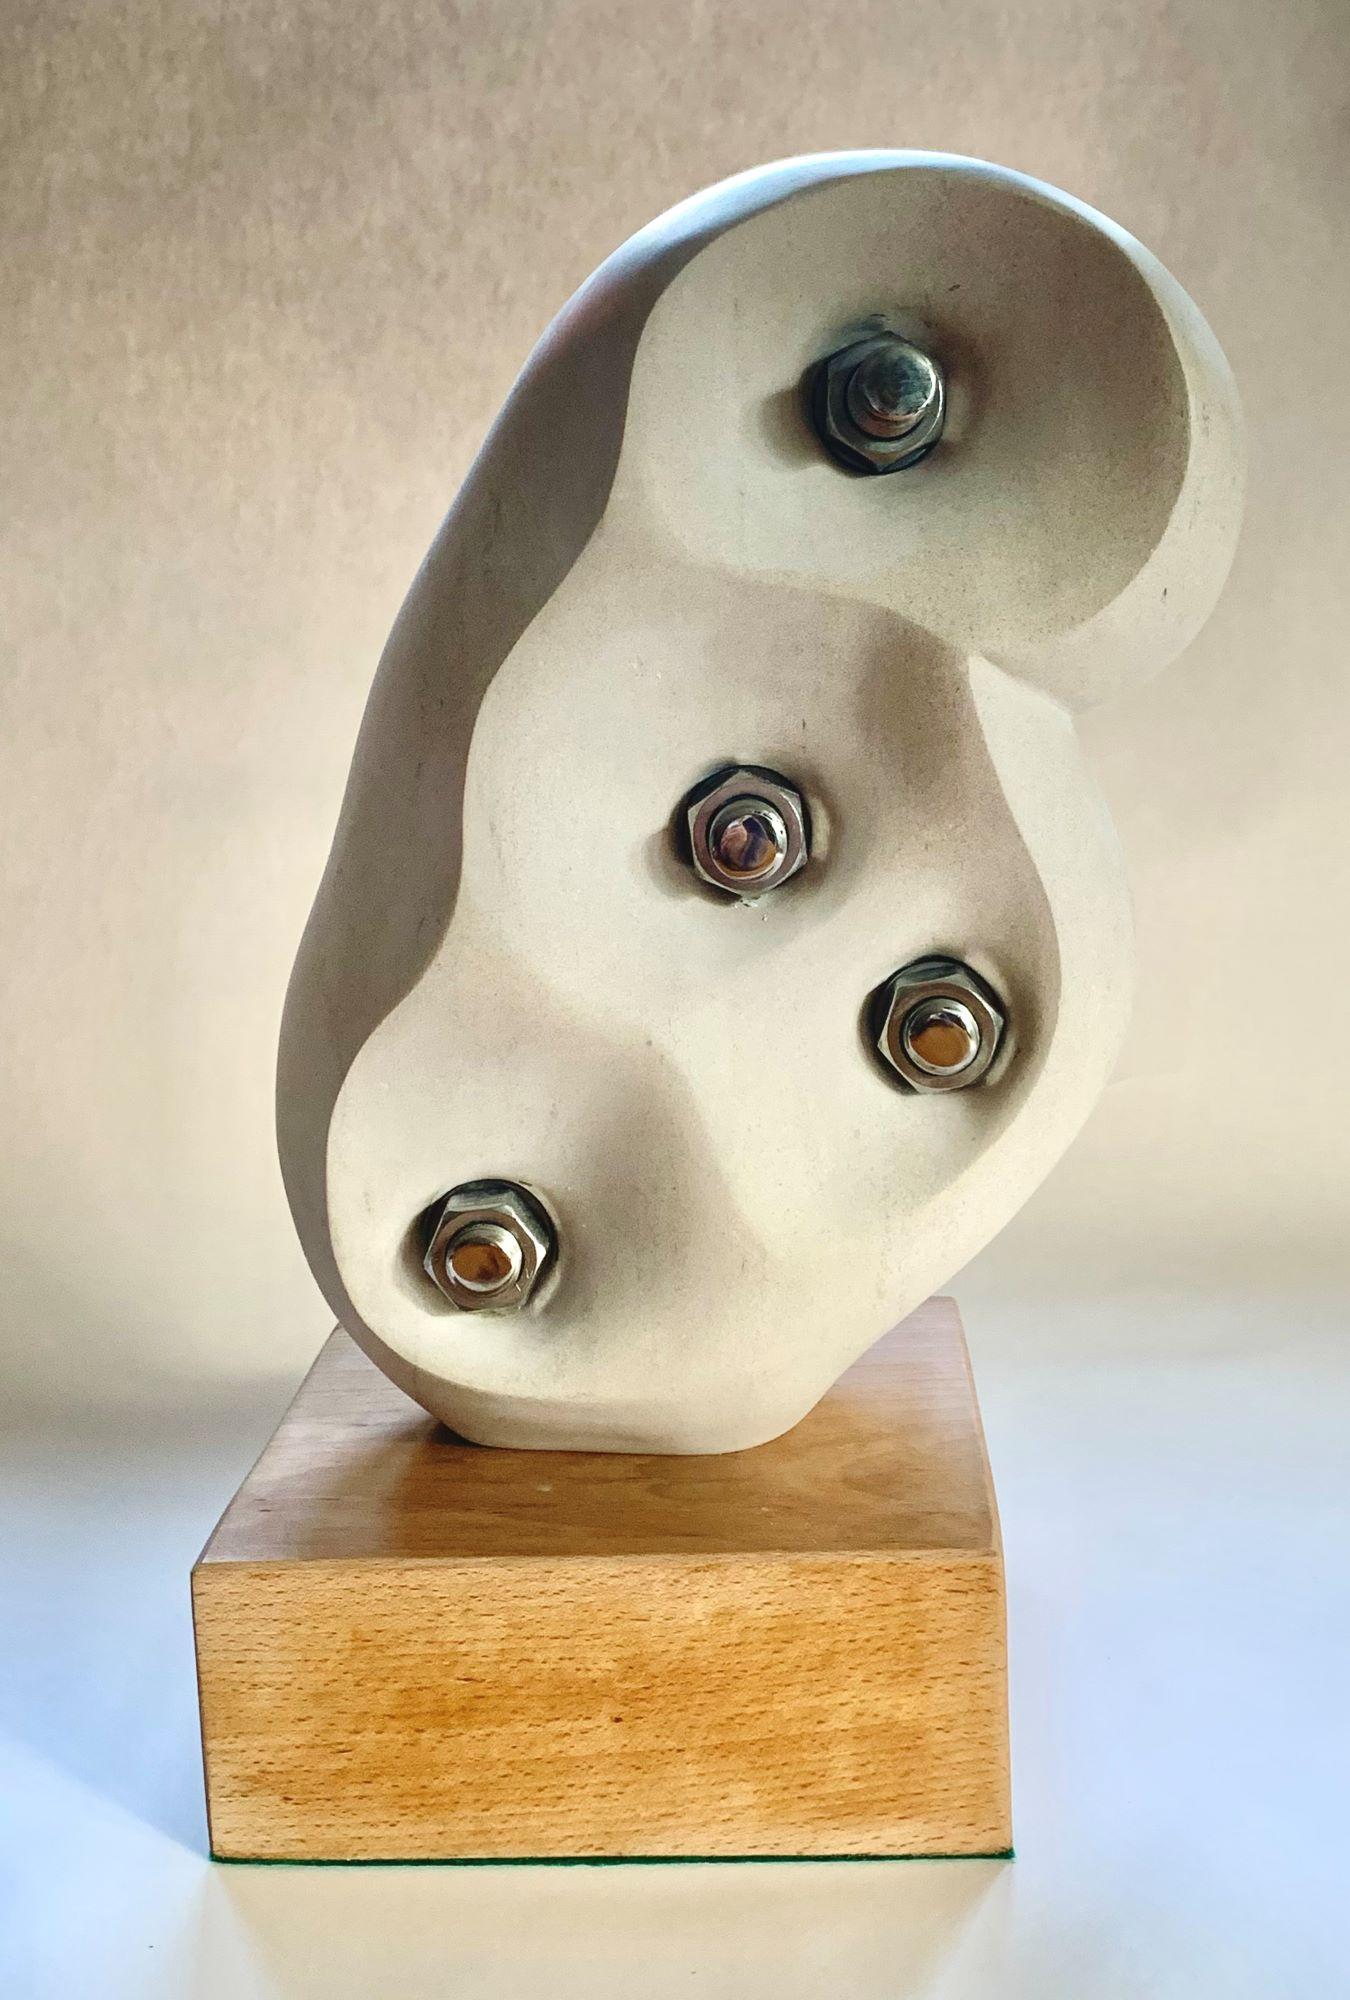 Without Bonds is a unique Portland limestone, stainless steel on beech wood base sculpture by contemporary artist Peter Brooke-Ball, dimensions are 51 × 26 × 20.5 cm (20.1 × 10.2 × 8.1 in).  
The sculpture comes with a certificate of